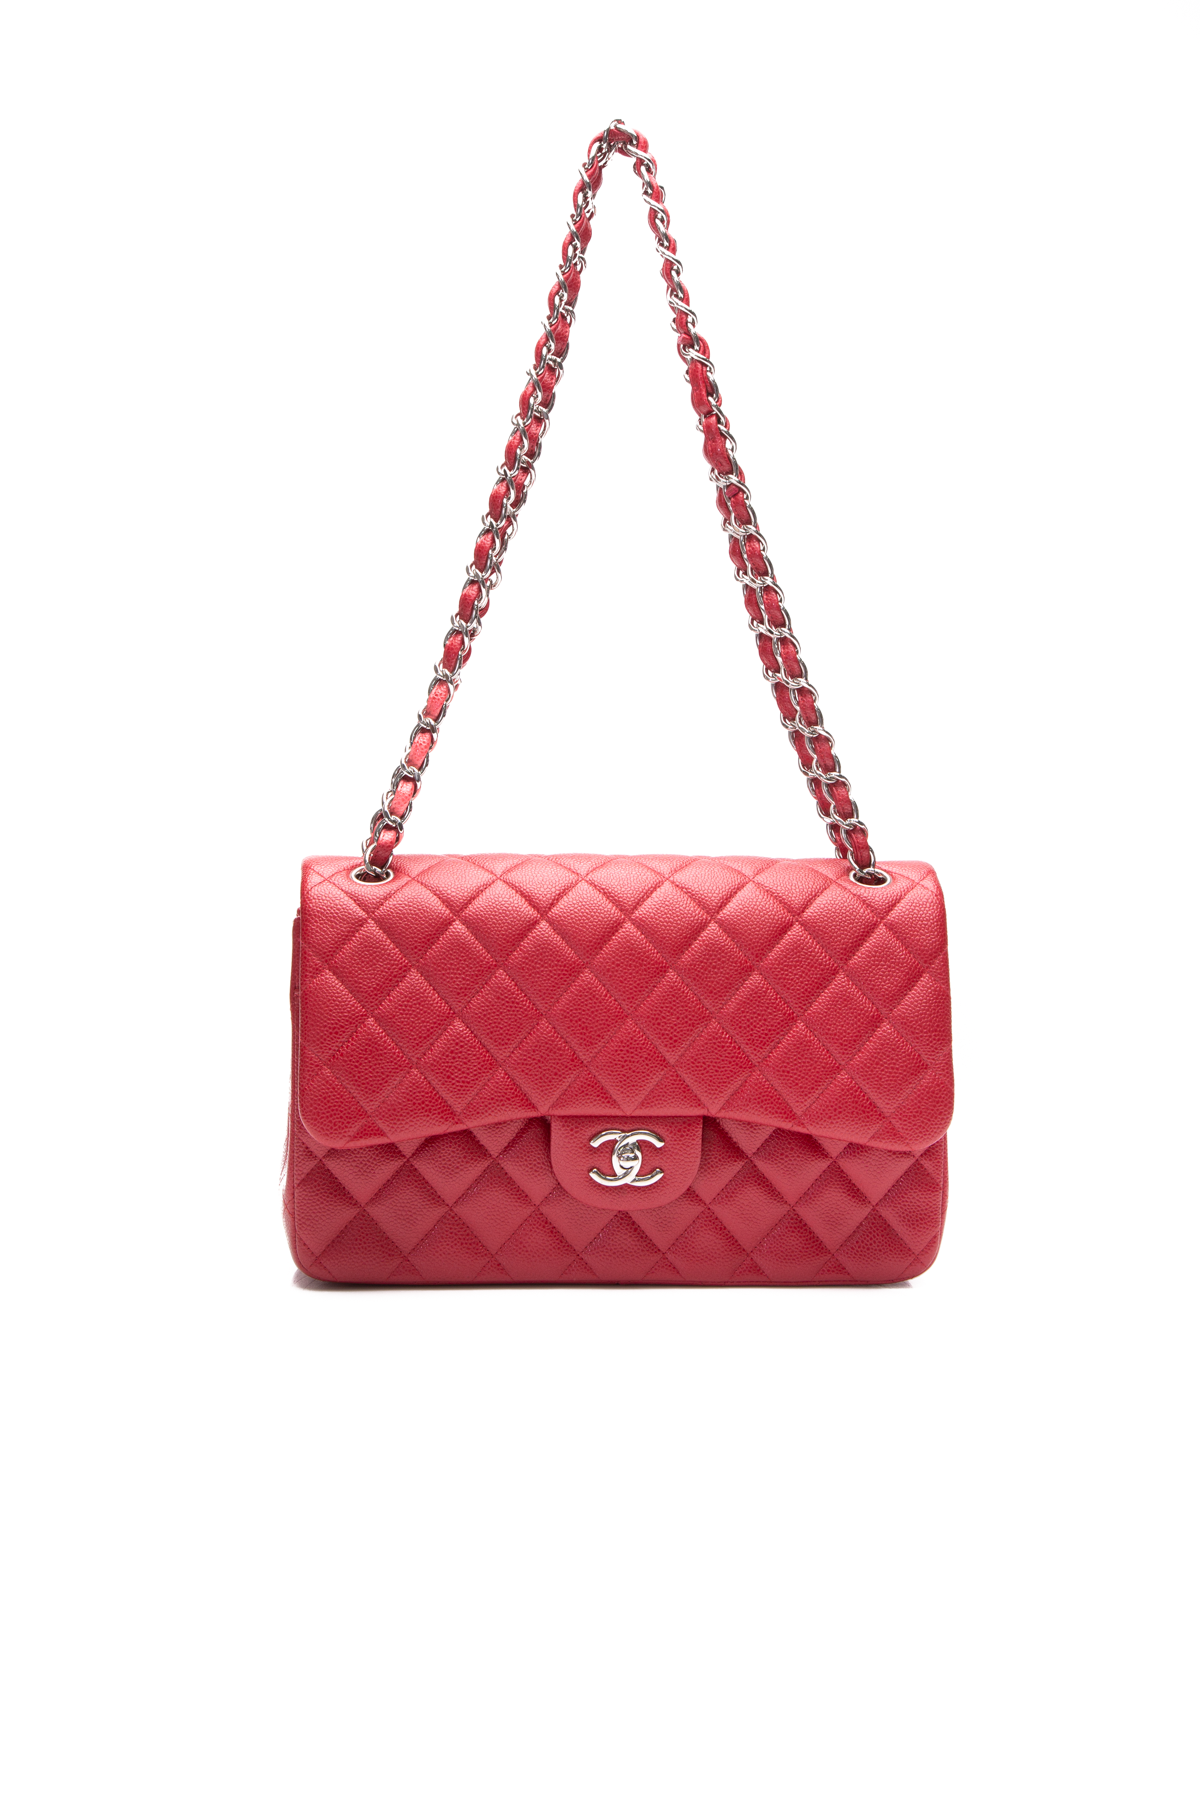 Chanel Red Quilted Lambskin Medium Classic Double Flap Bag Silver Hardware, 2019 (Very Good)